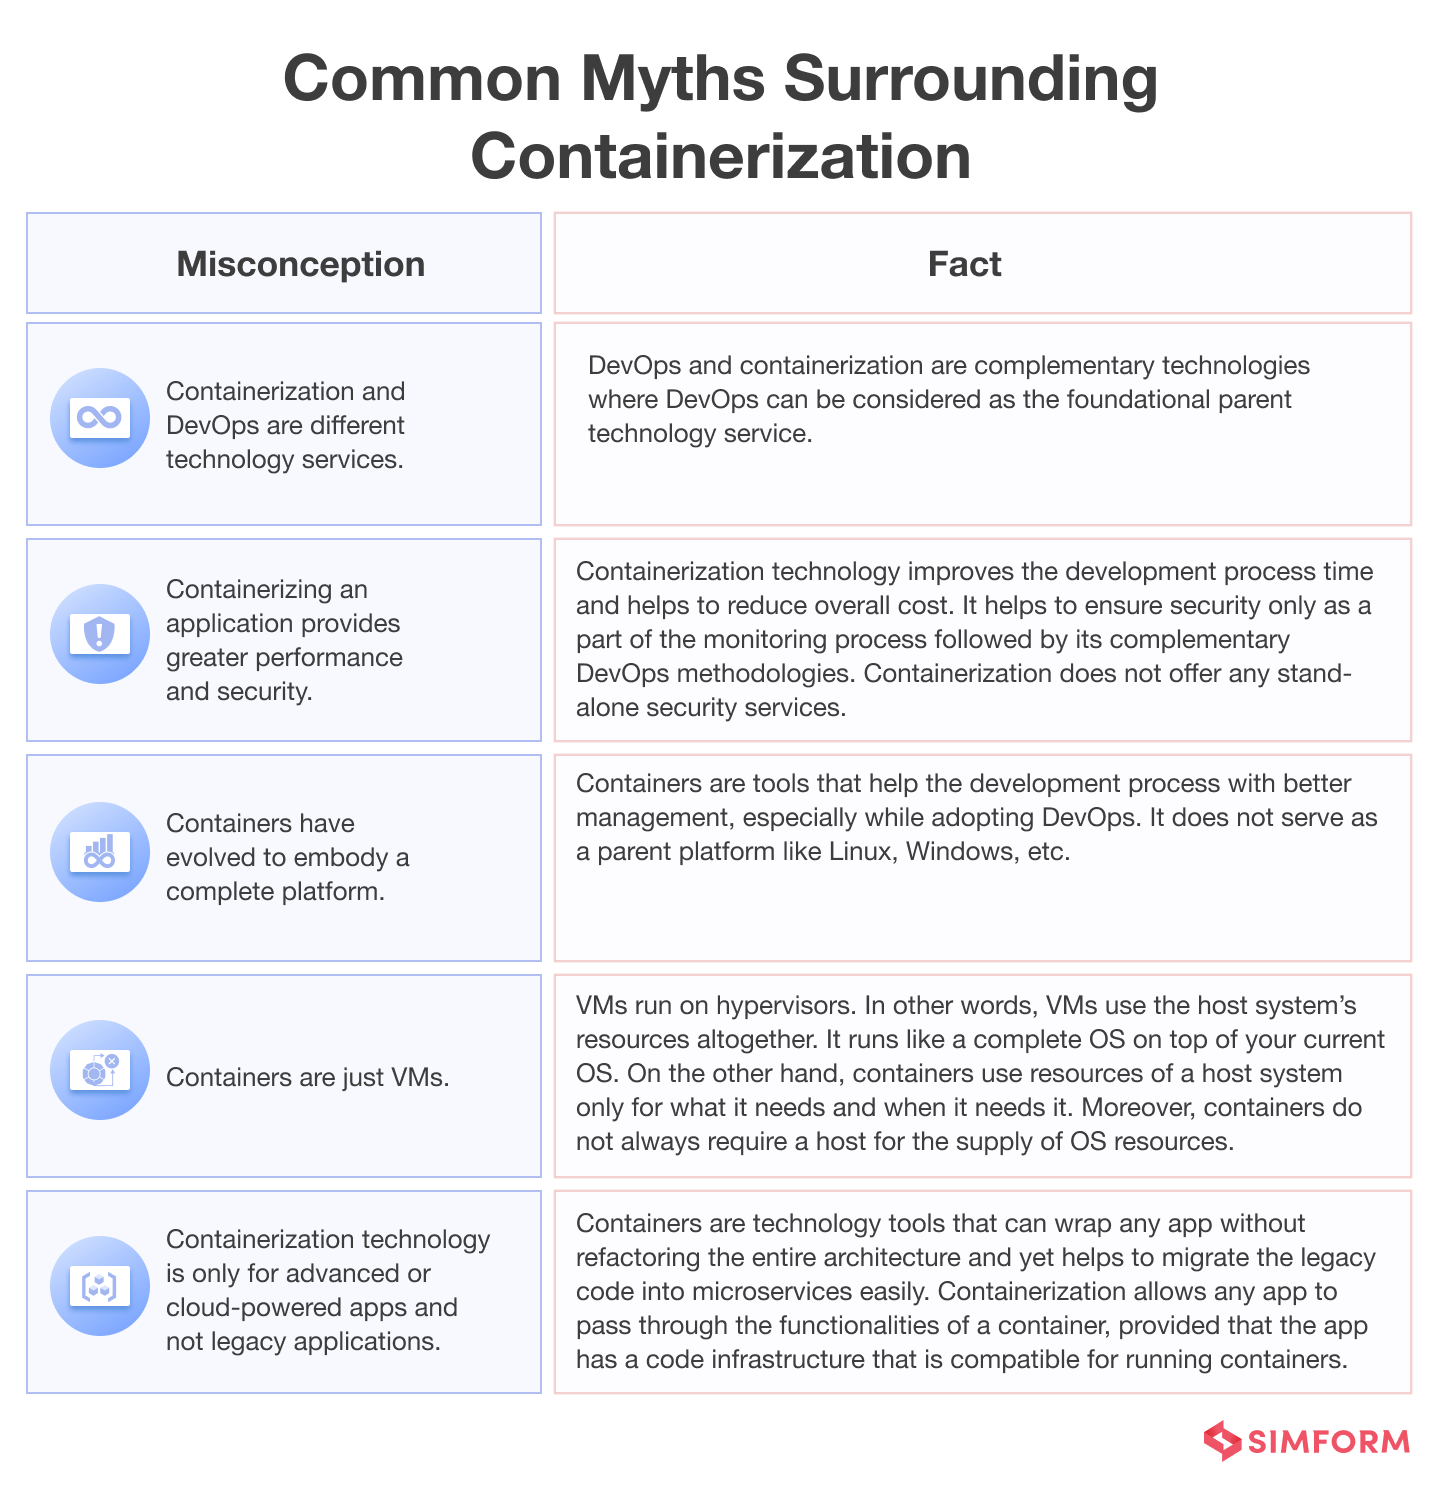 Common Myths Surrounding Containerization